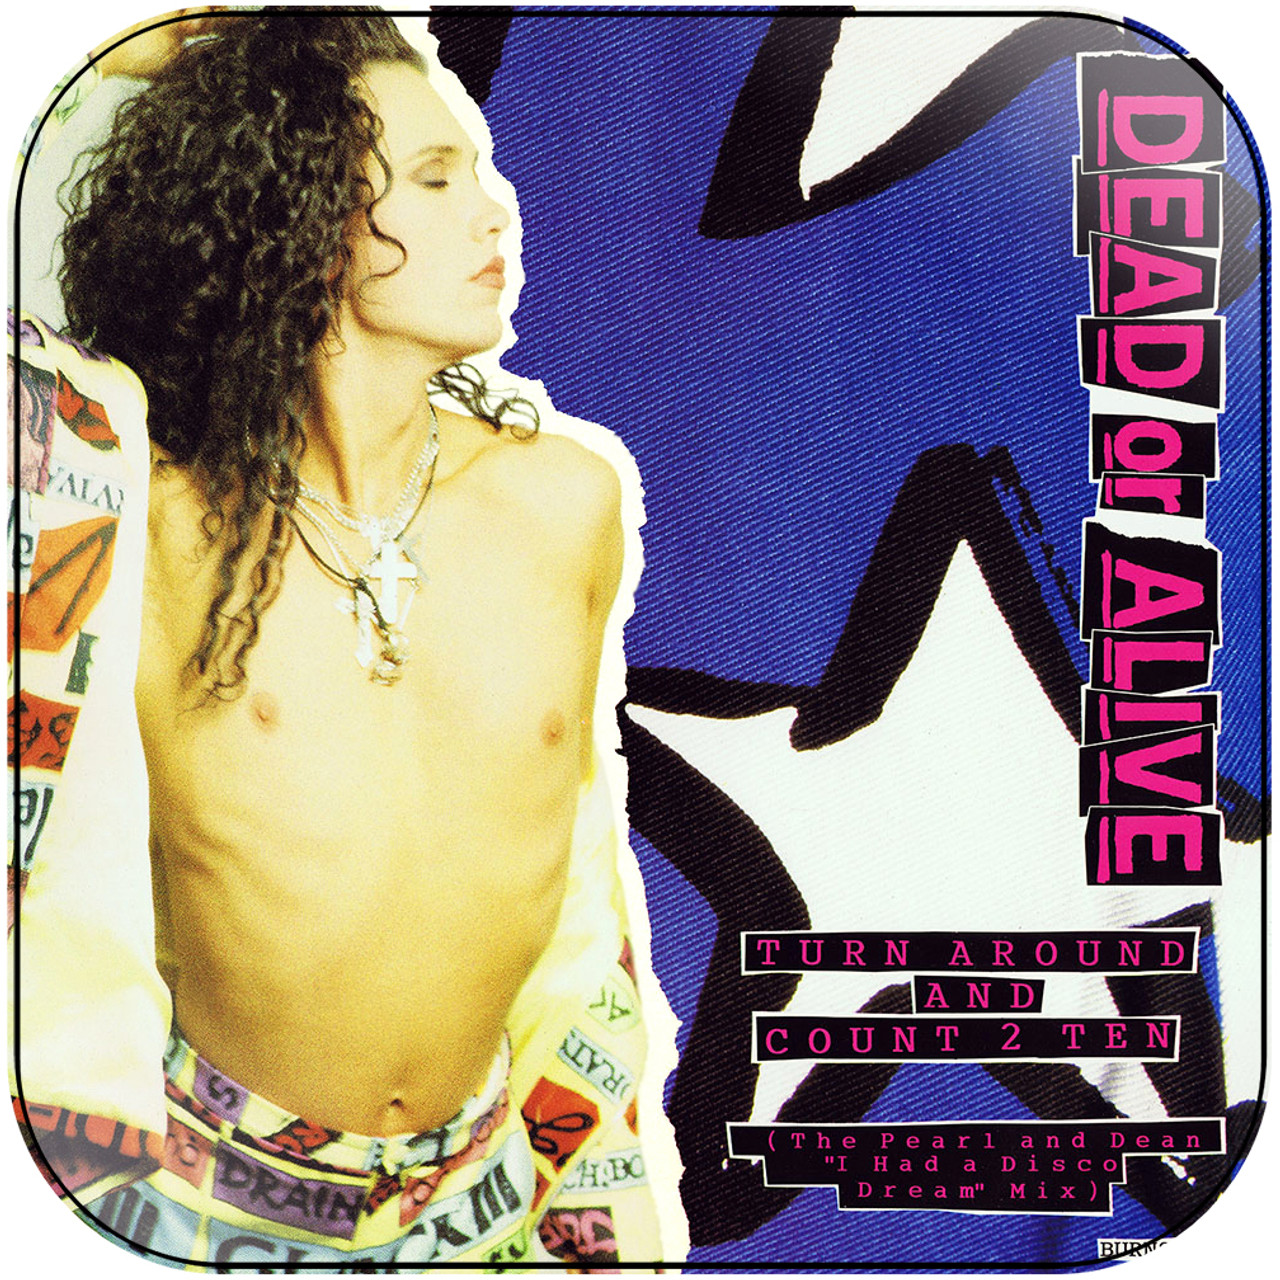 UK12' Dead Or Alive/Turn Around And Count 2 Ten-The Pearl And DeanI Had A  Disco DreamMix - レコード